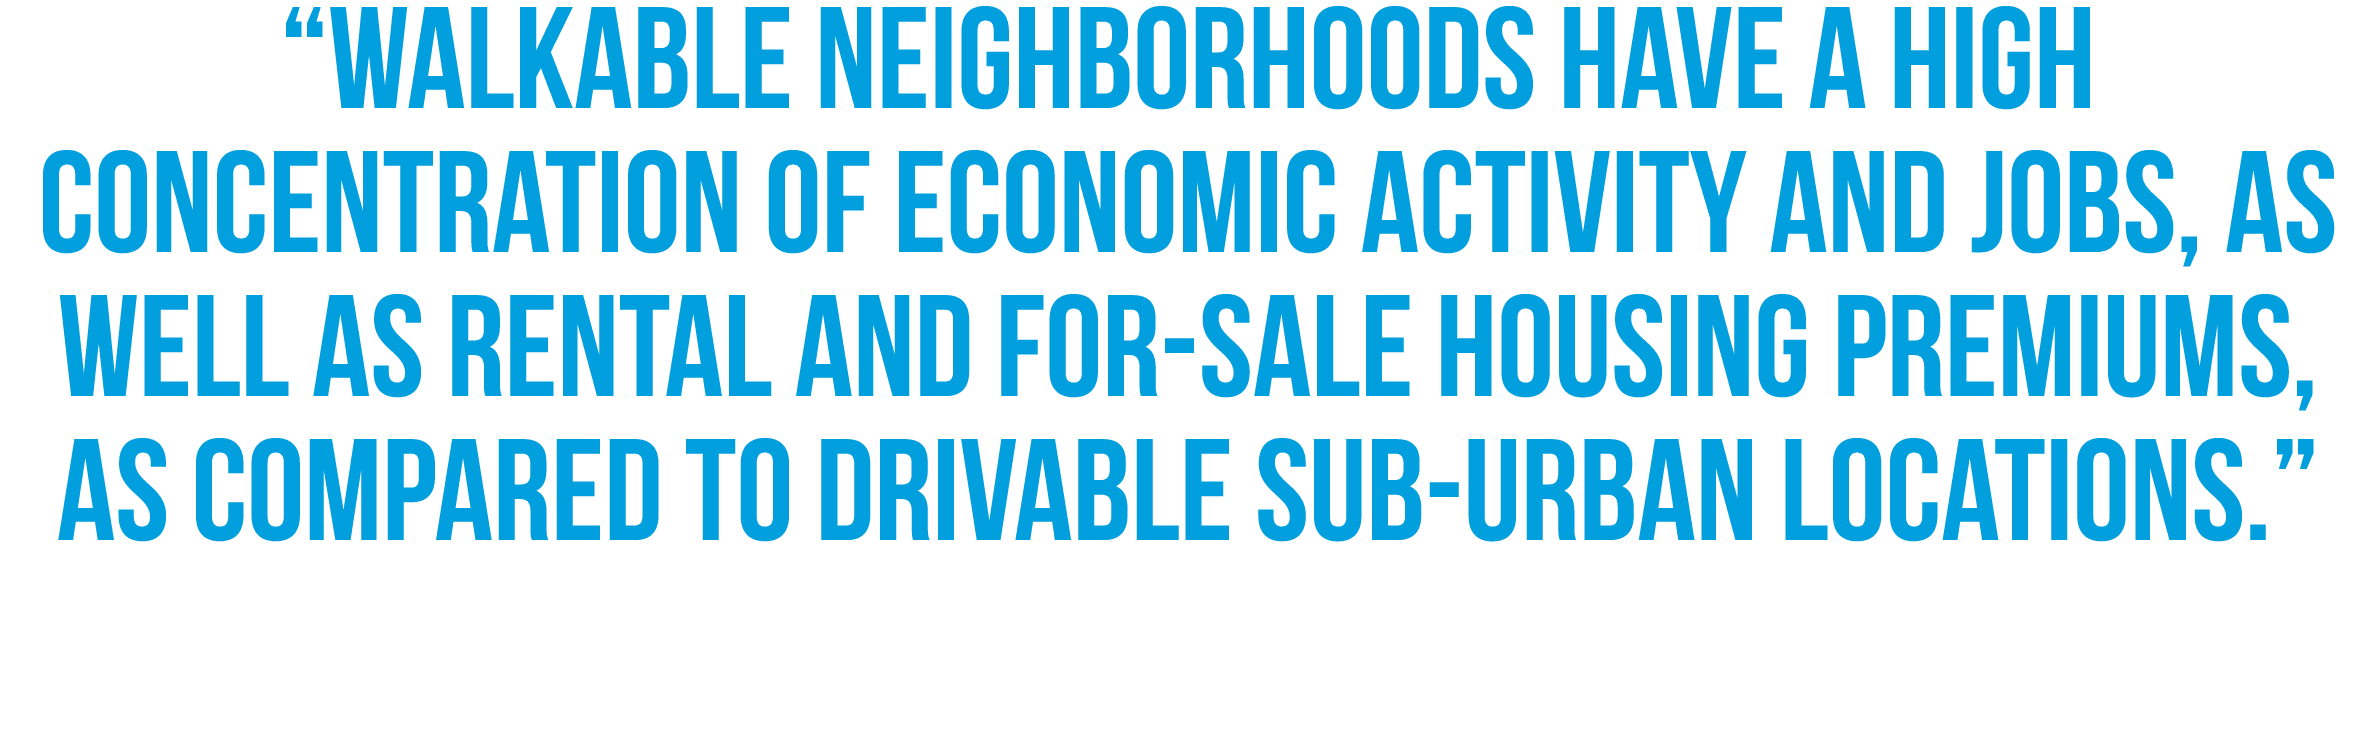  Walkable neighborhoods have a high concentration of economic activity and jobs, as well as rental and for-sale housi   